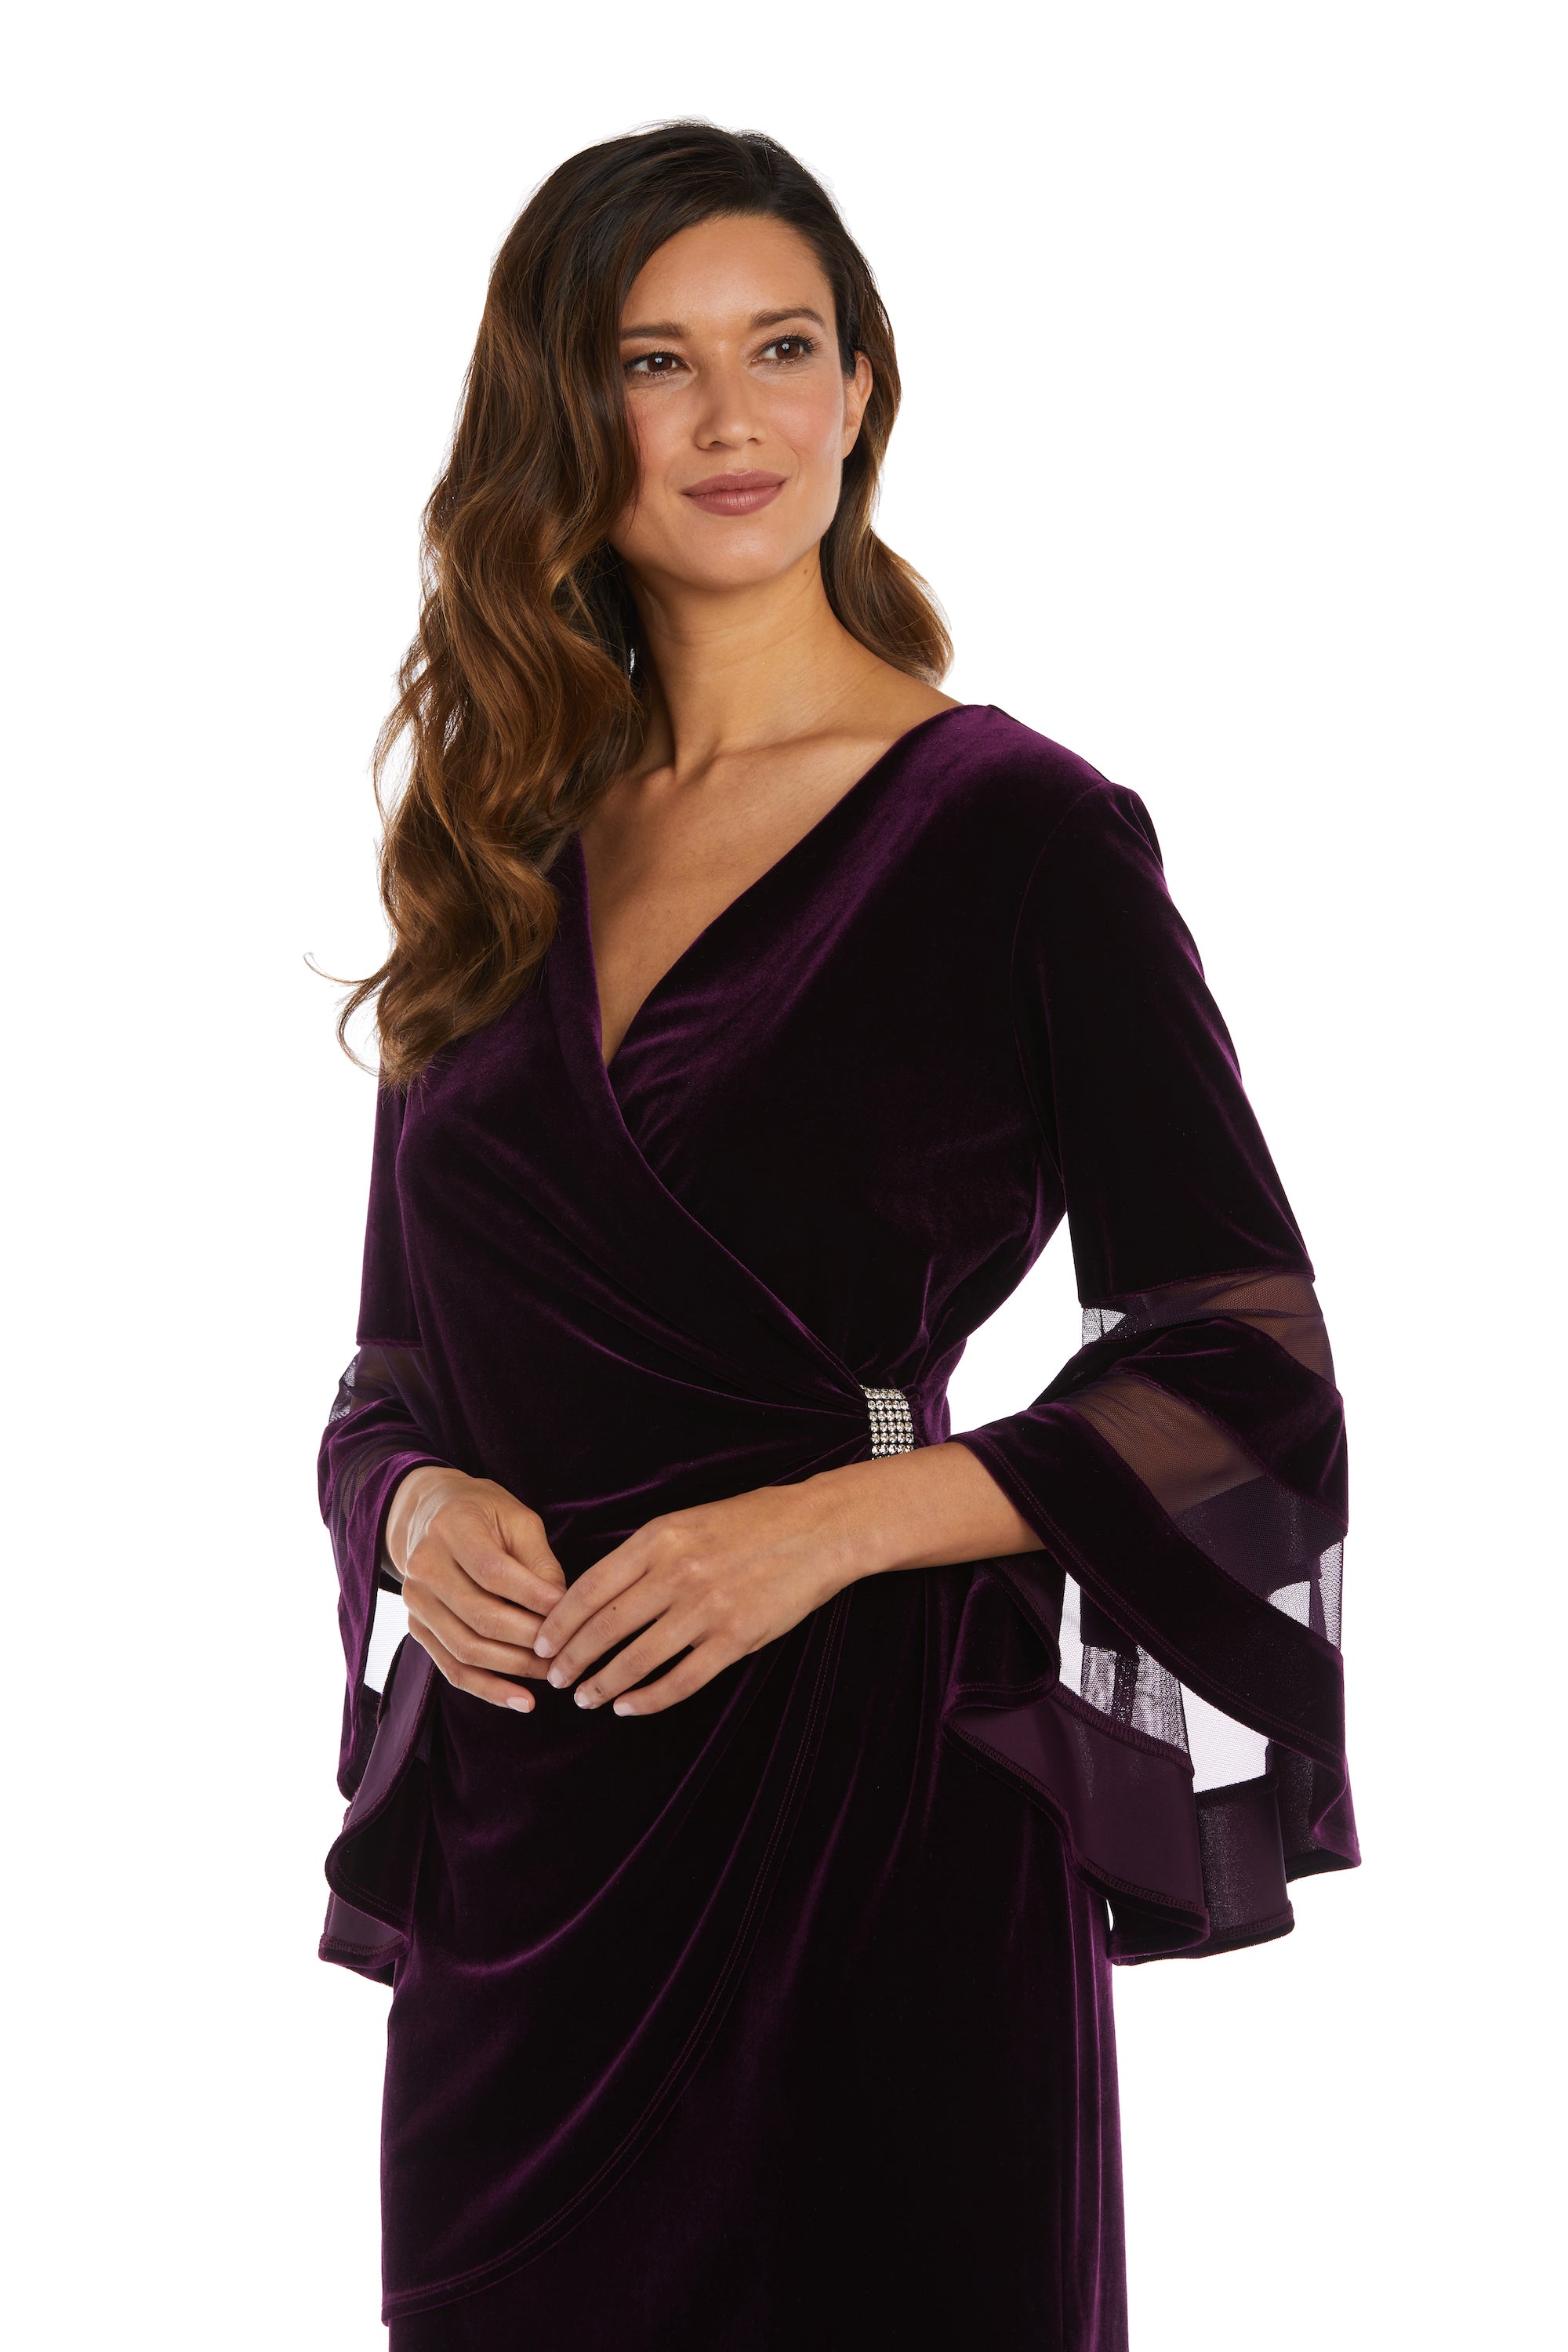 Plus Size Purple Velvet Mermaid Purple Mermaid Prom Dress With Deep V Neck,  Beaded Long Sleeves, And Formal Evening Gown Style Style 233S From Cucu,  $107.68 | DHgate.Com